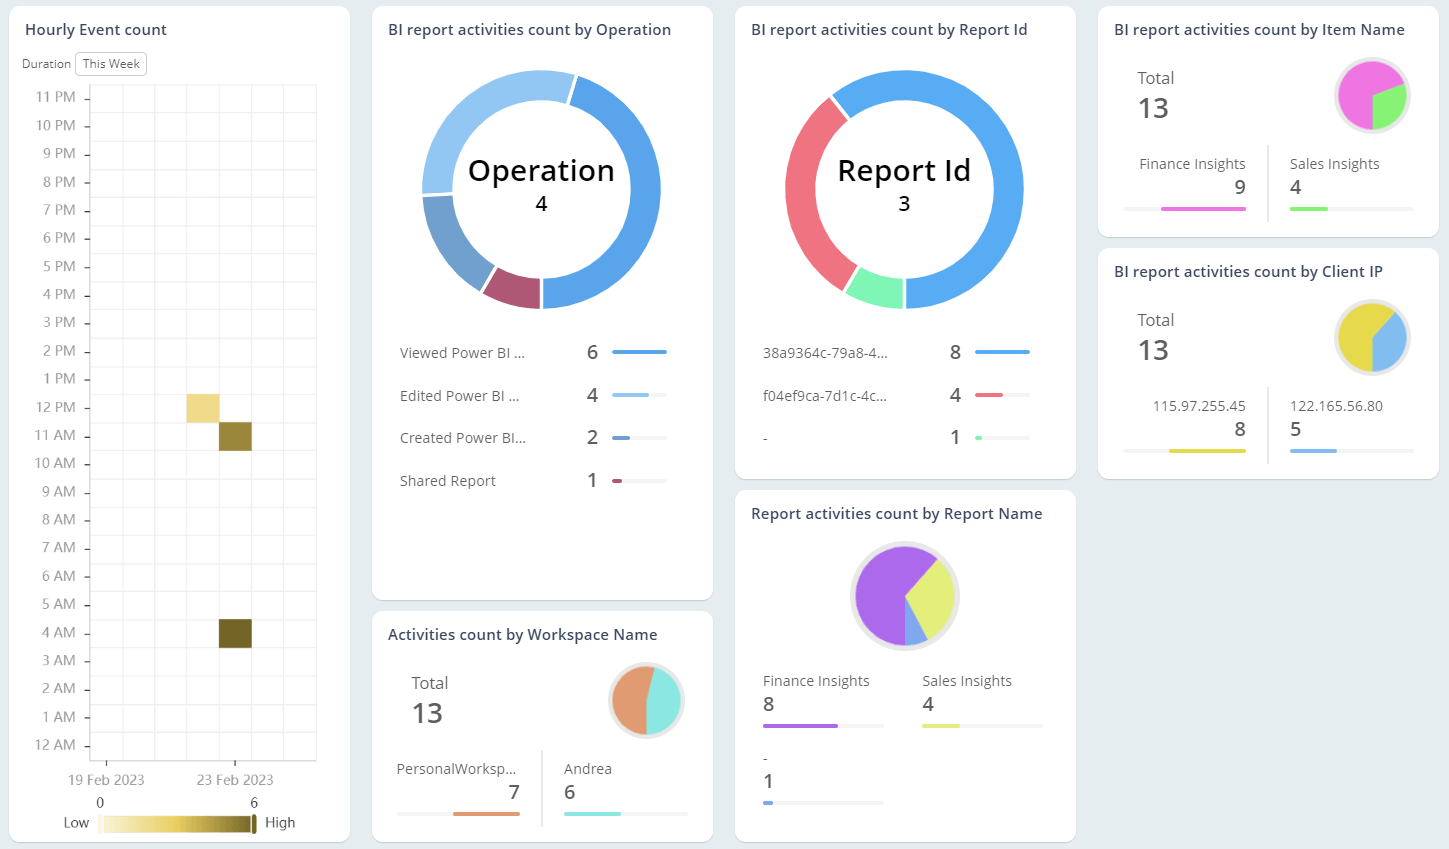 Stay up-to-date with report-related activity